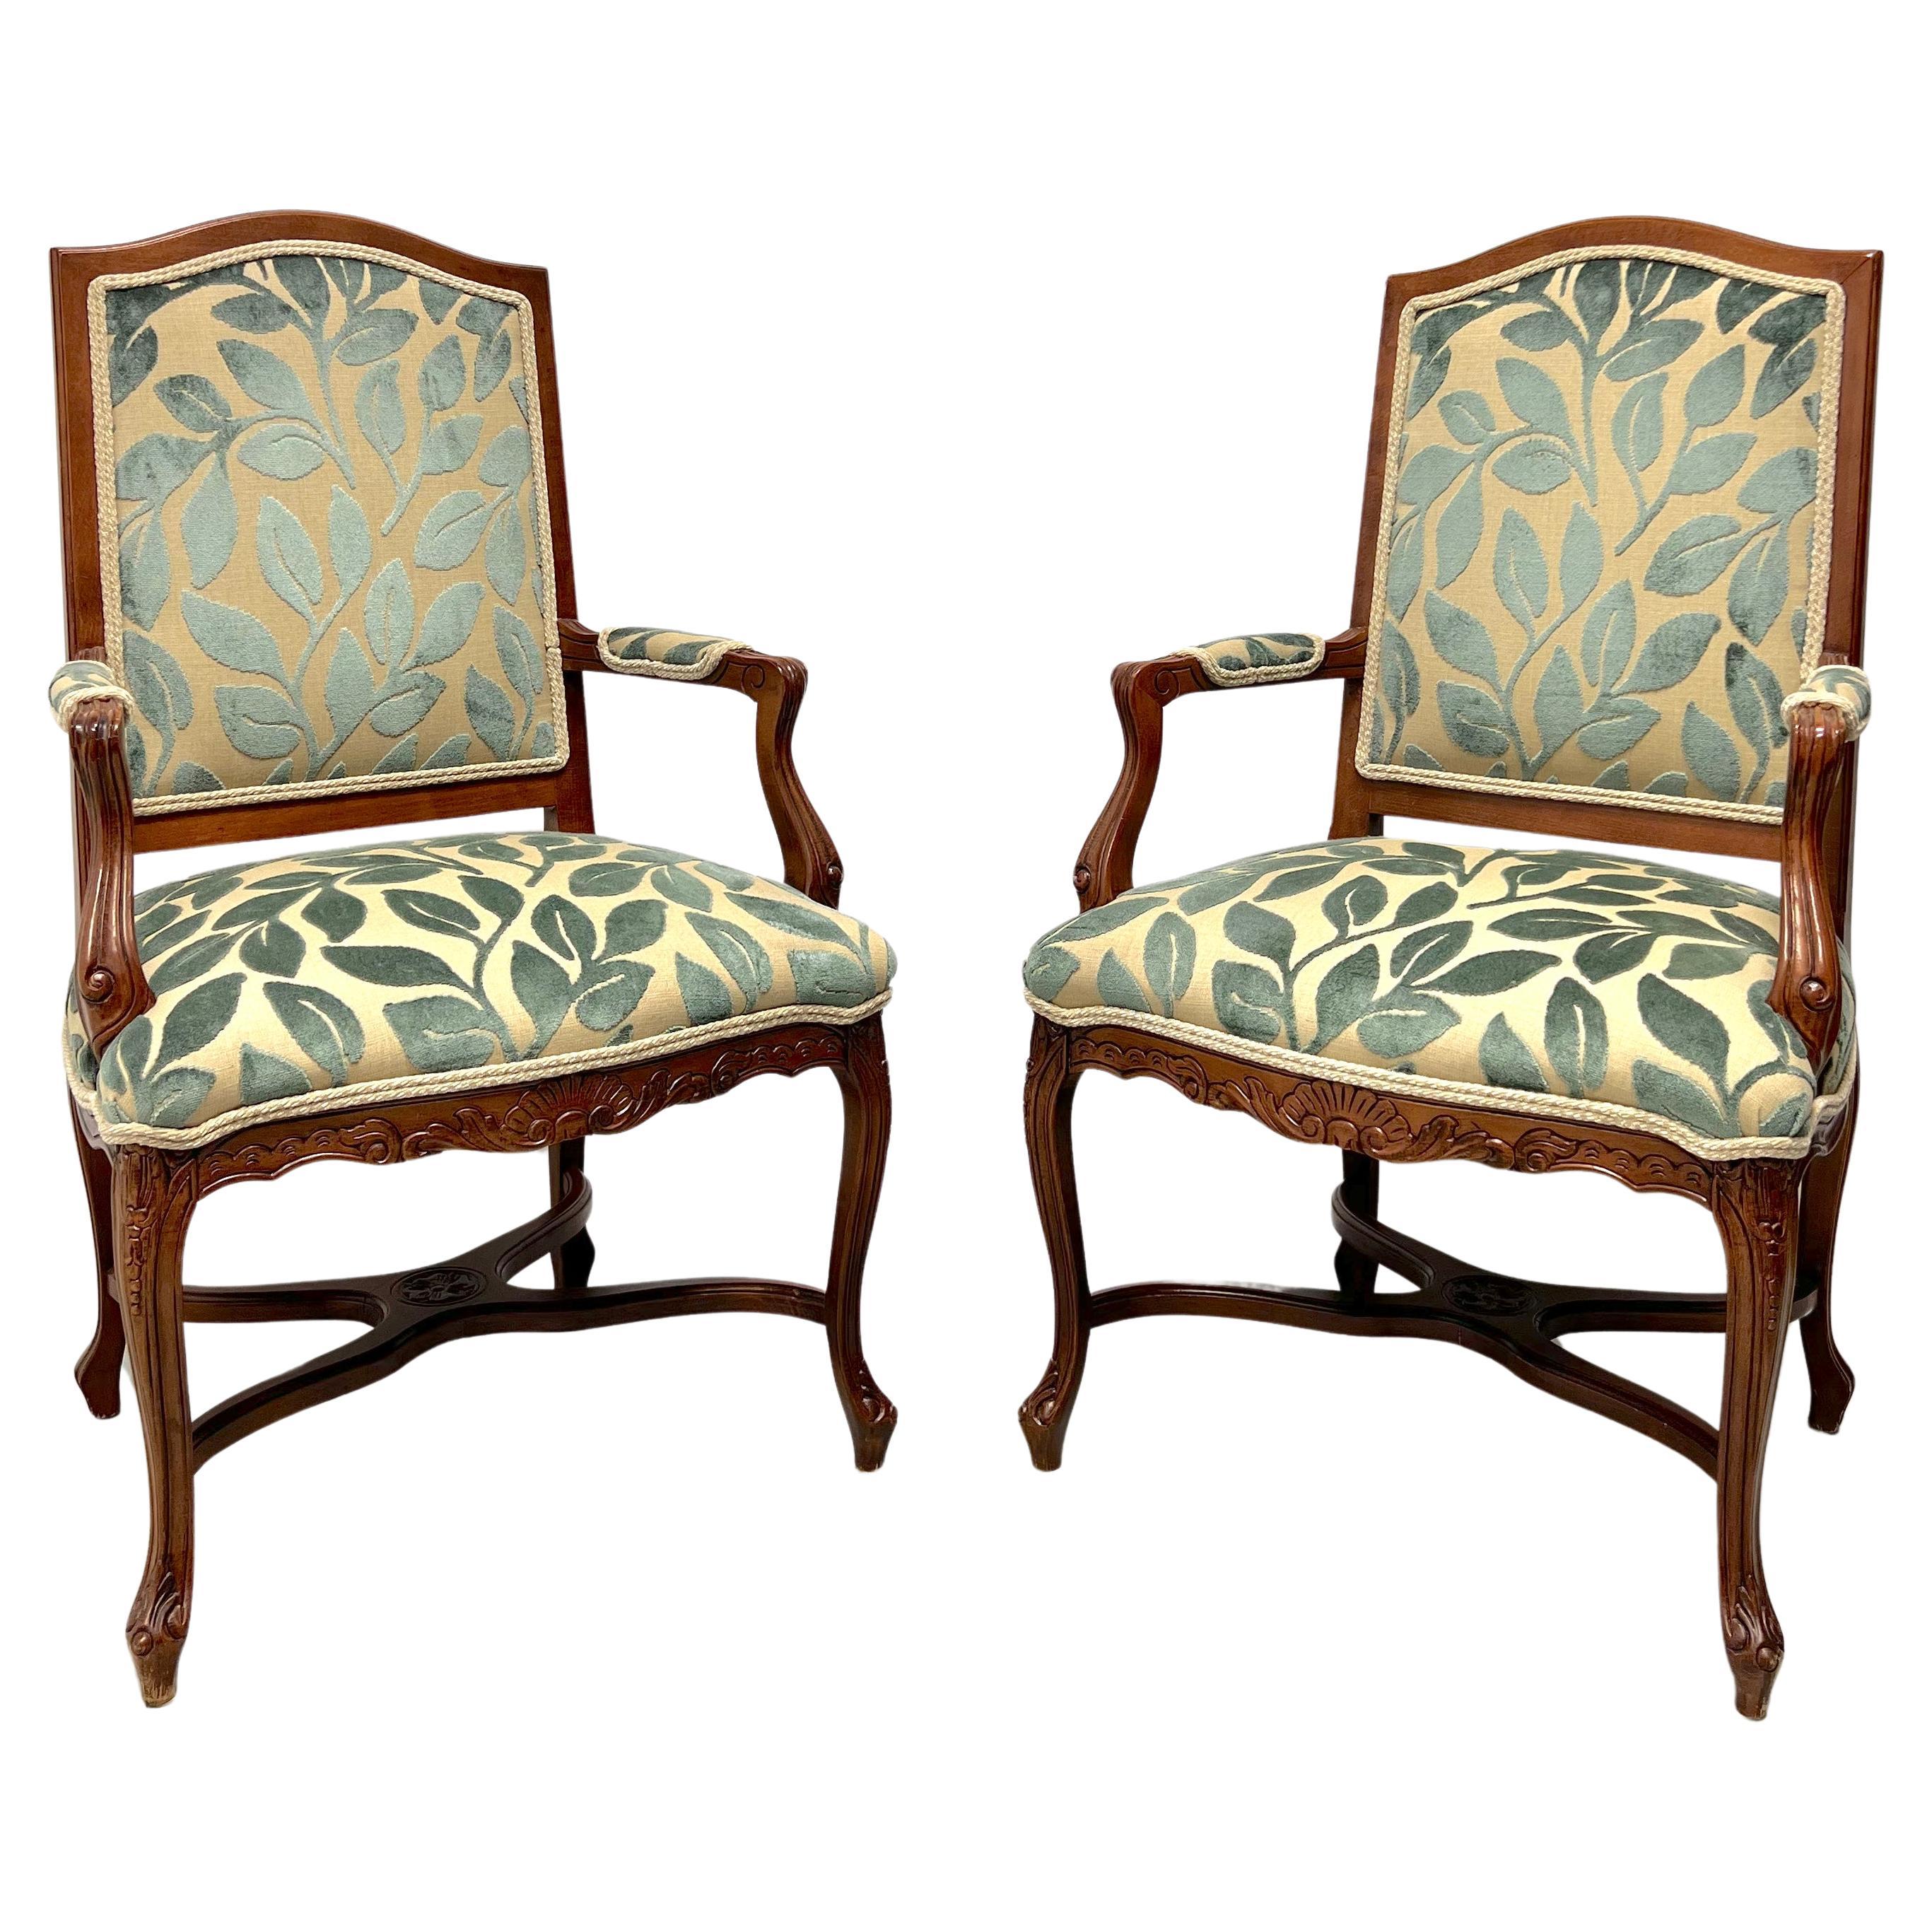 20th Century French Country Louis XV Walnut Fauteuils Open-Arm Armchairs - Pair